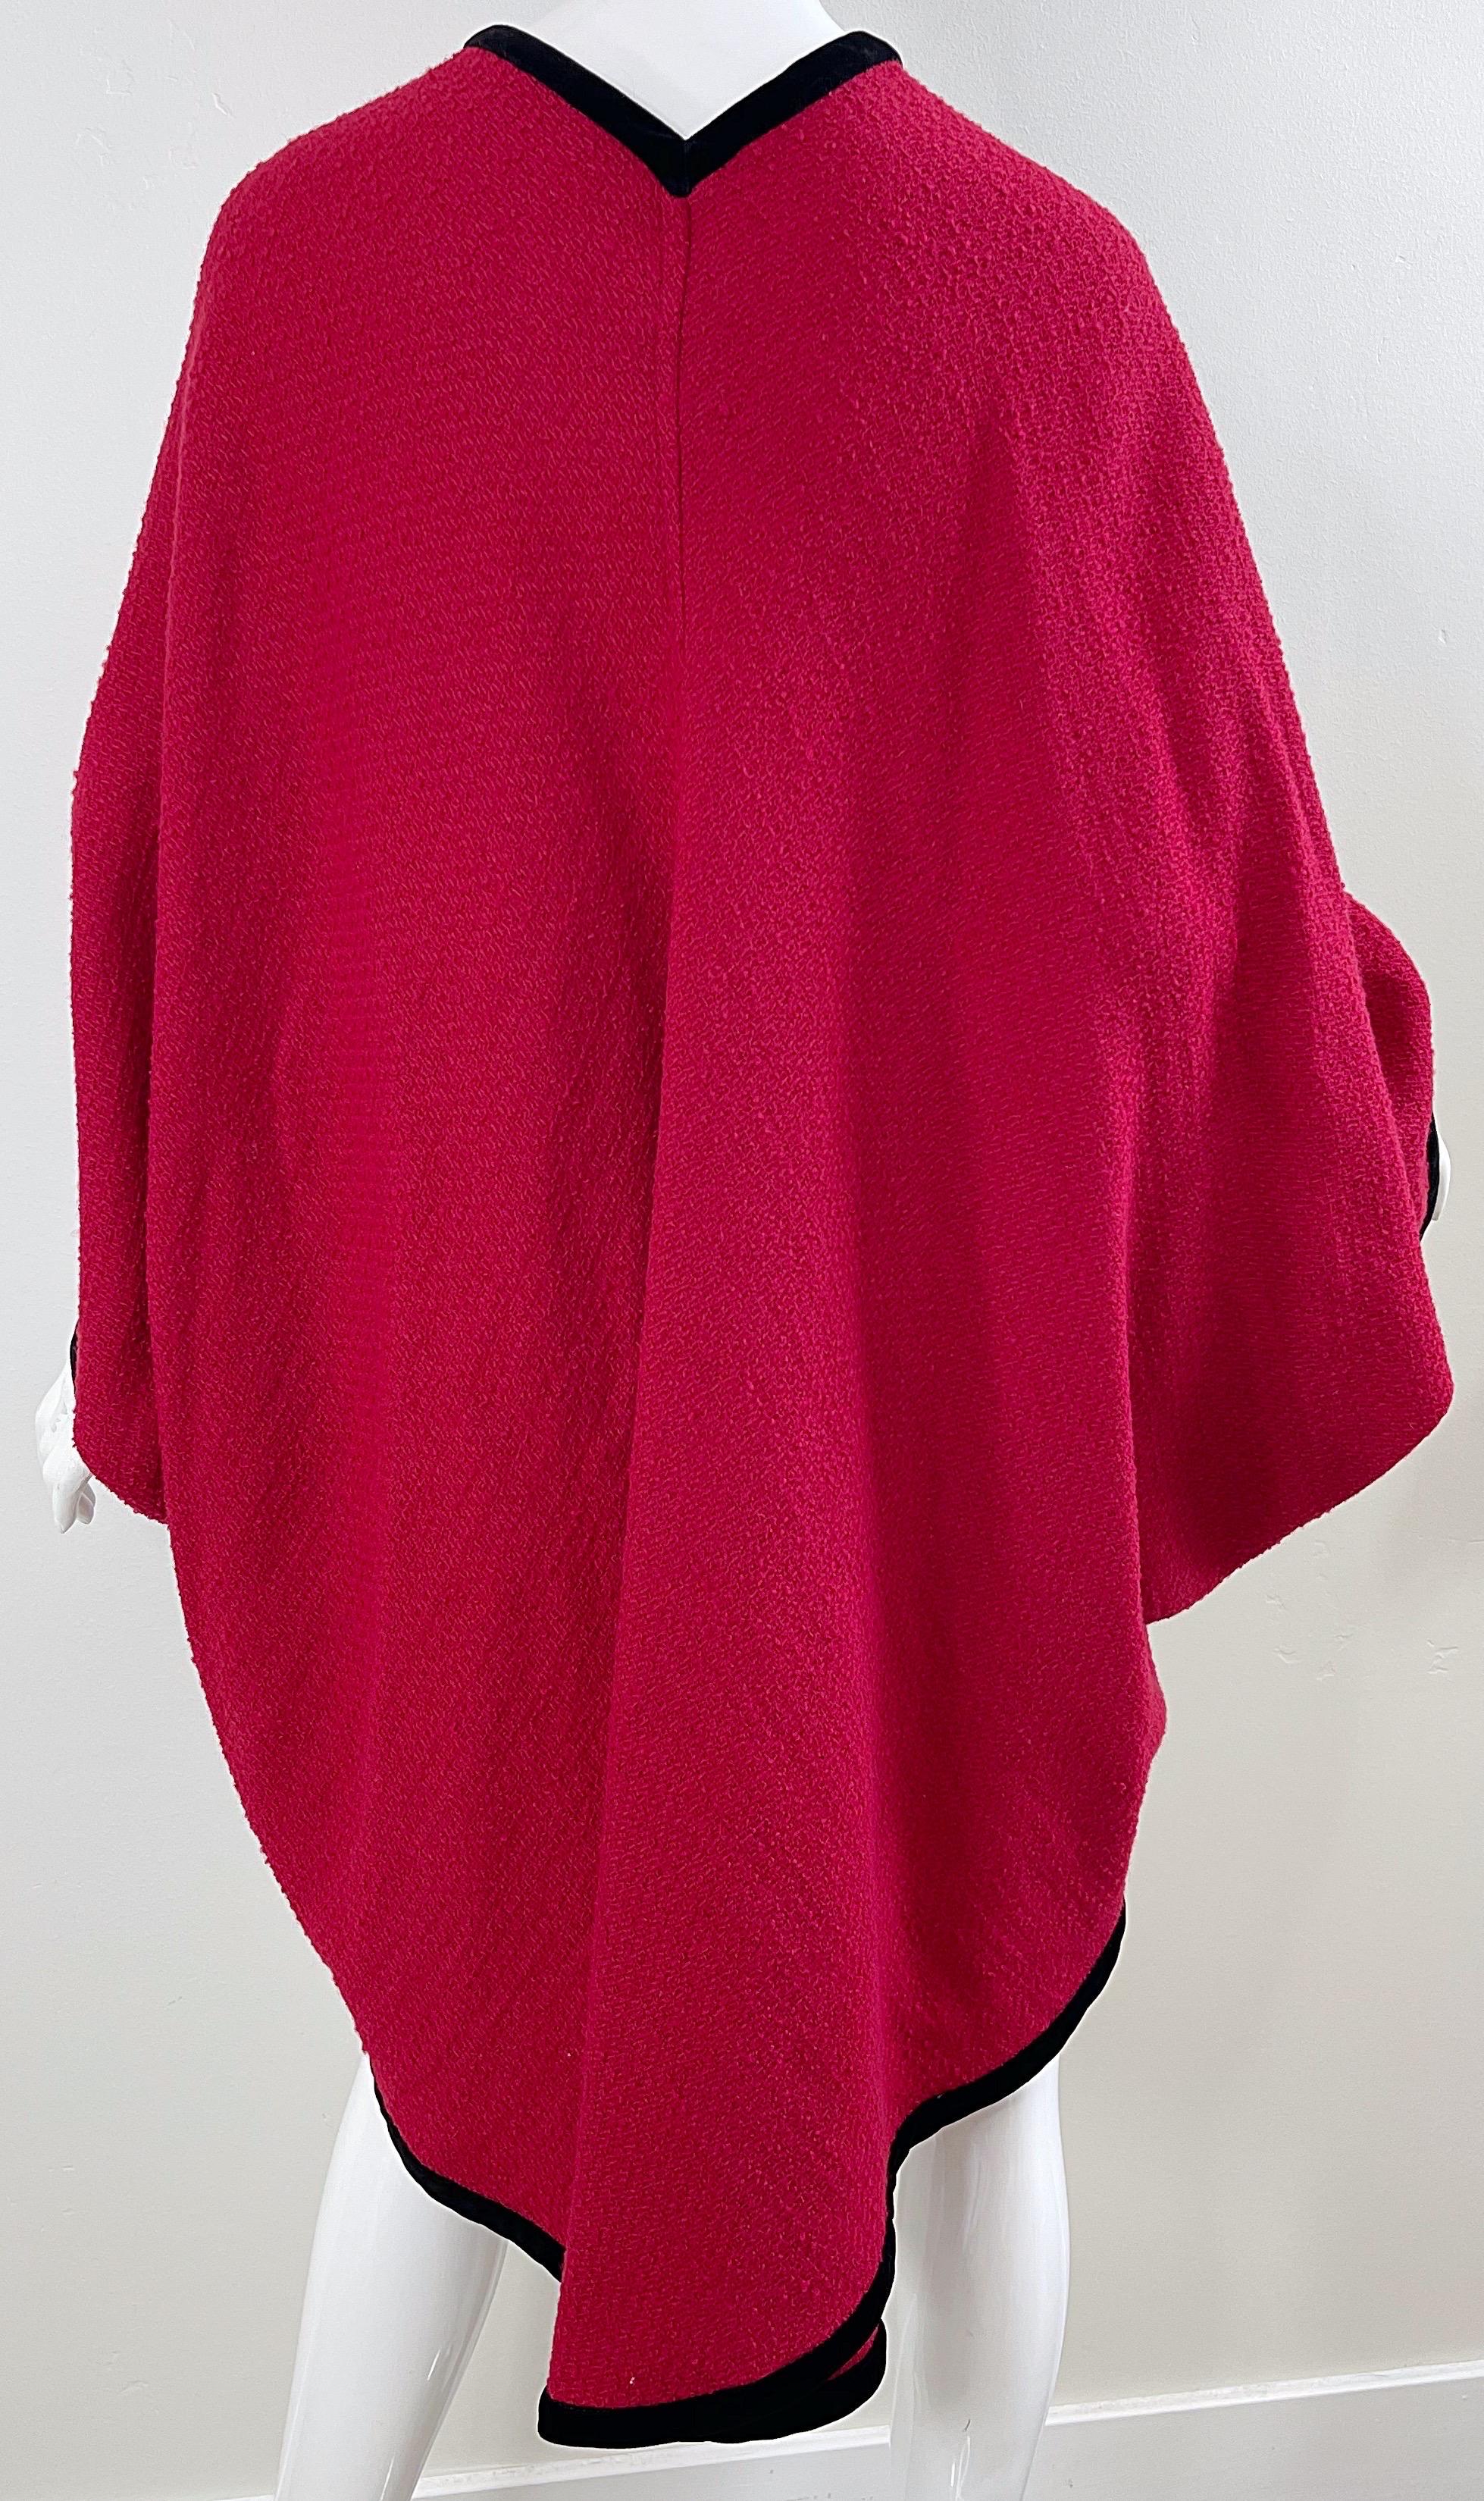 Karl Lagerfeld 1980s Lipstick Red Boiled Wool Cocoon Vintage Cape Kimono Jacket For Sale 3